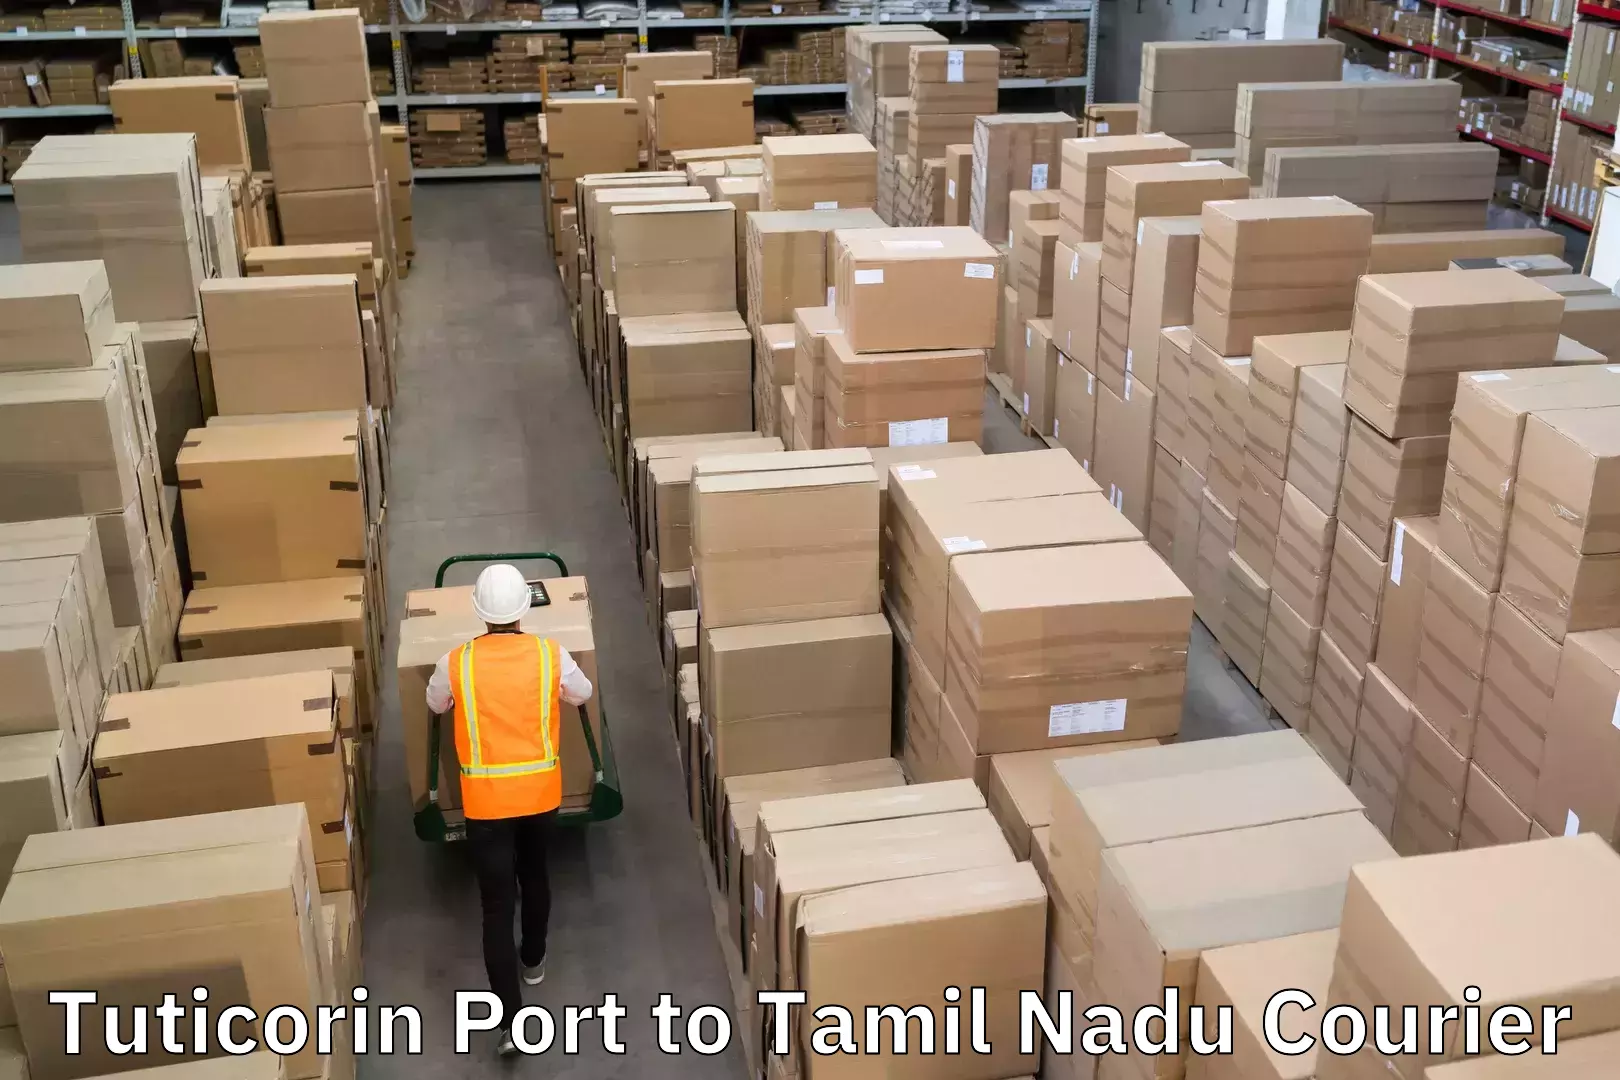 Quality courier services Tuticorin Port to Tamil Nadu